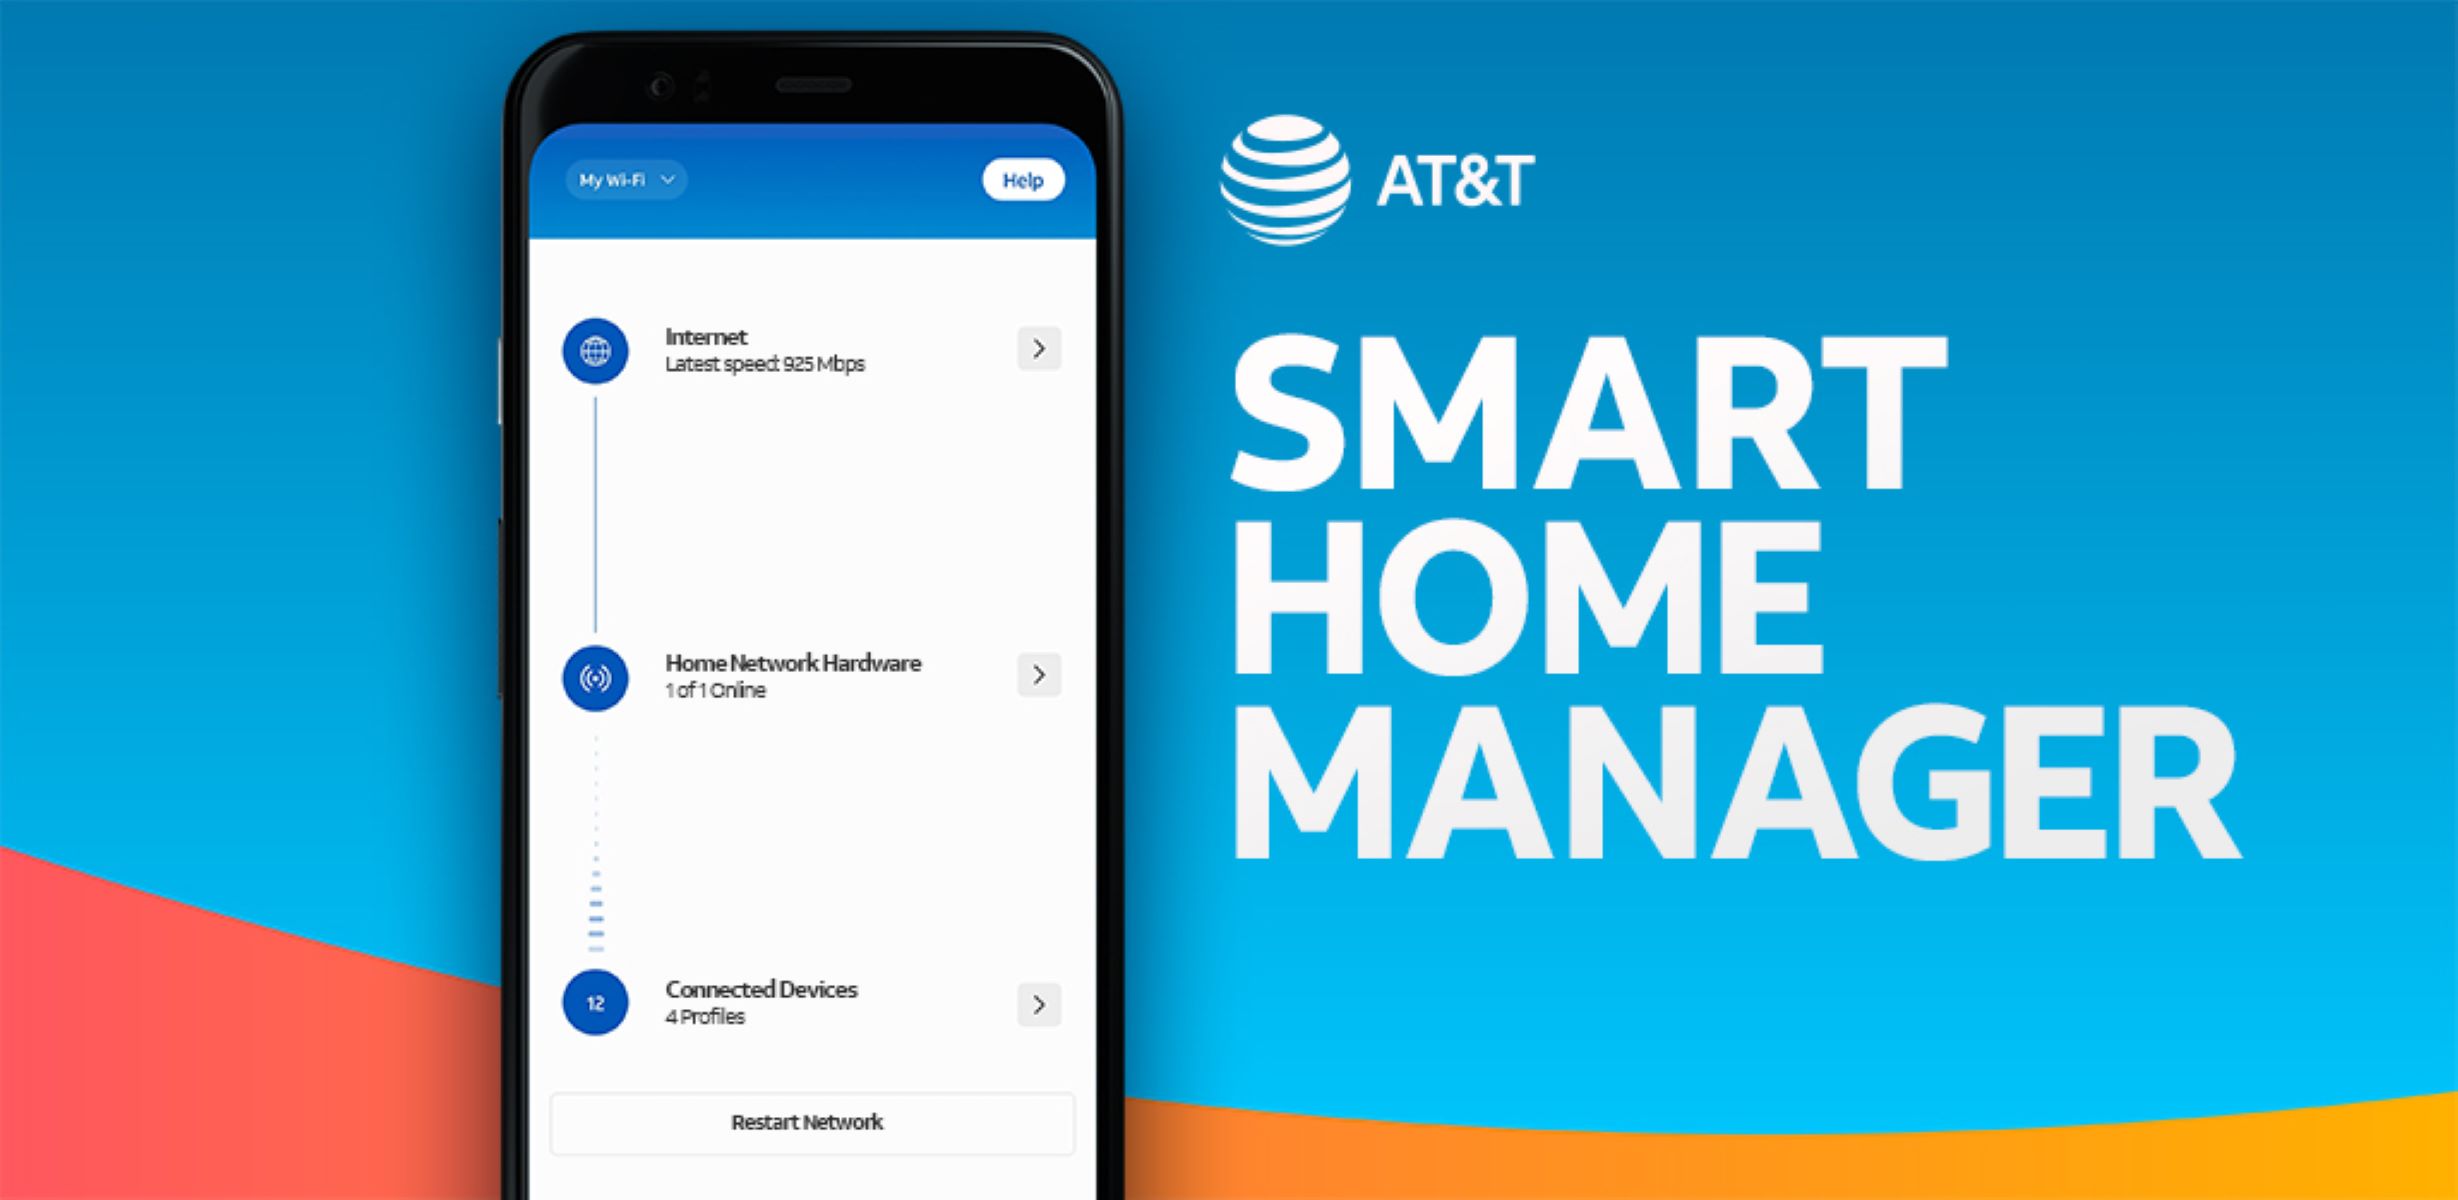 What Is The Smart Home Manager App